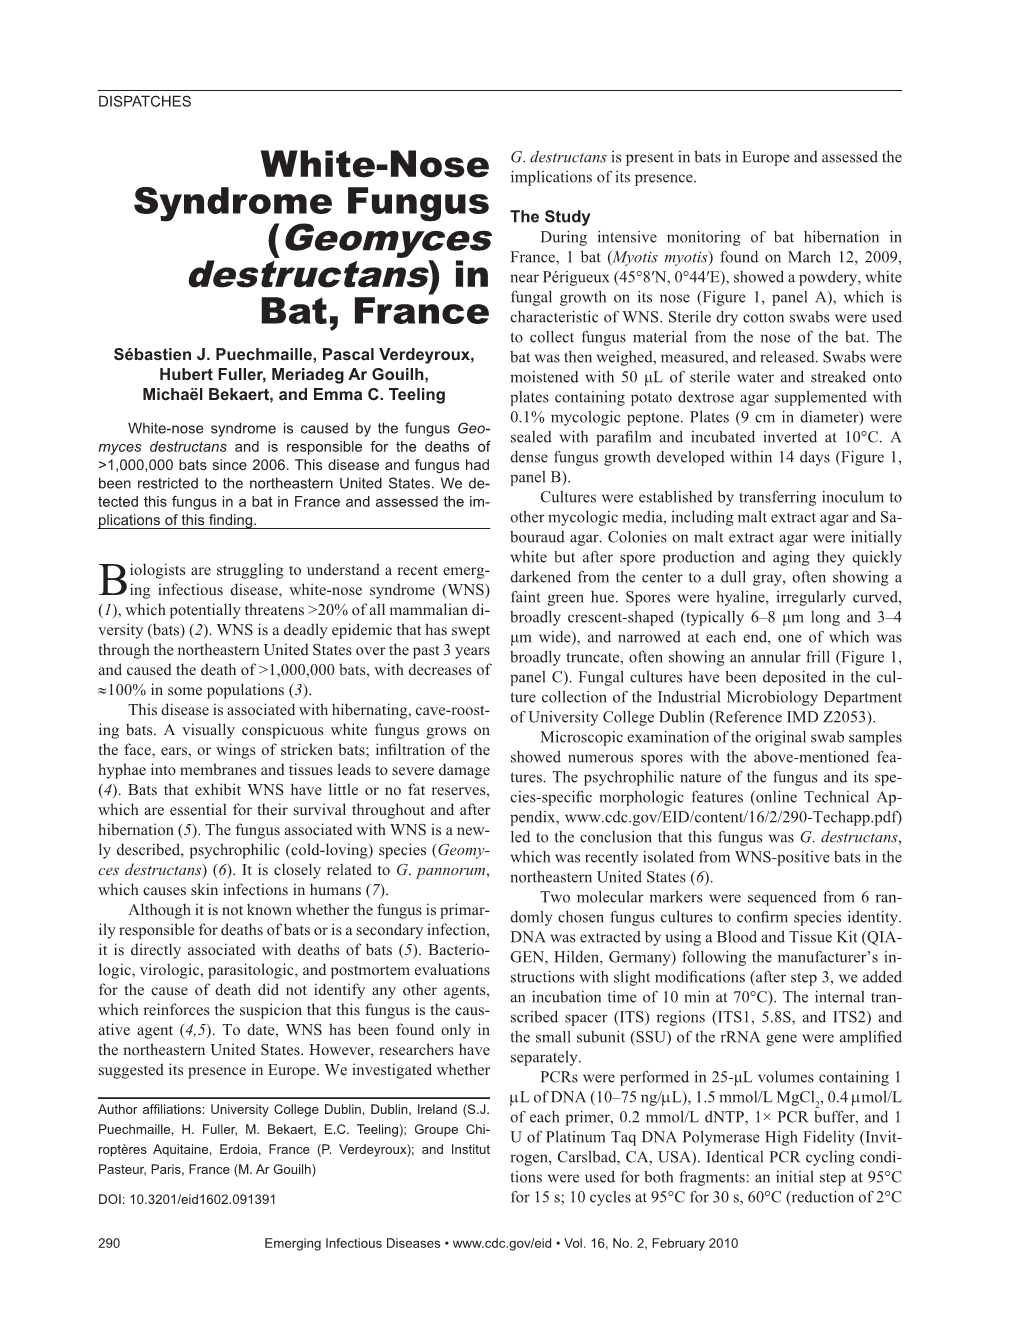 White-Nose Syndrome Fungus (Geomyces Destructans) in Bat, France